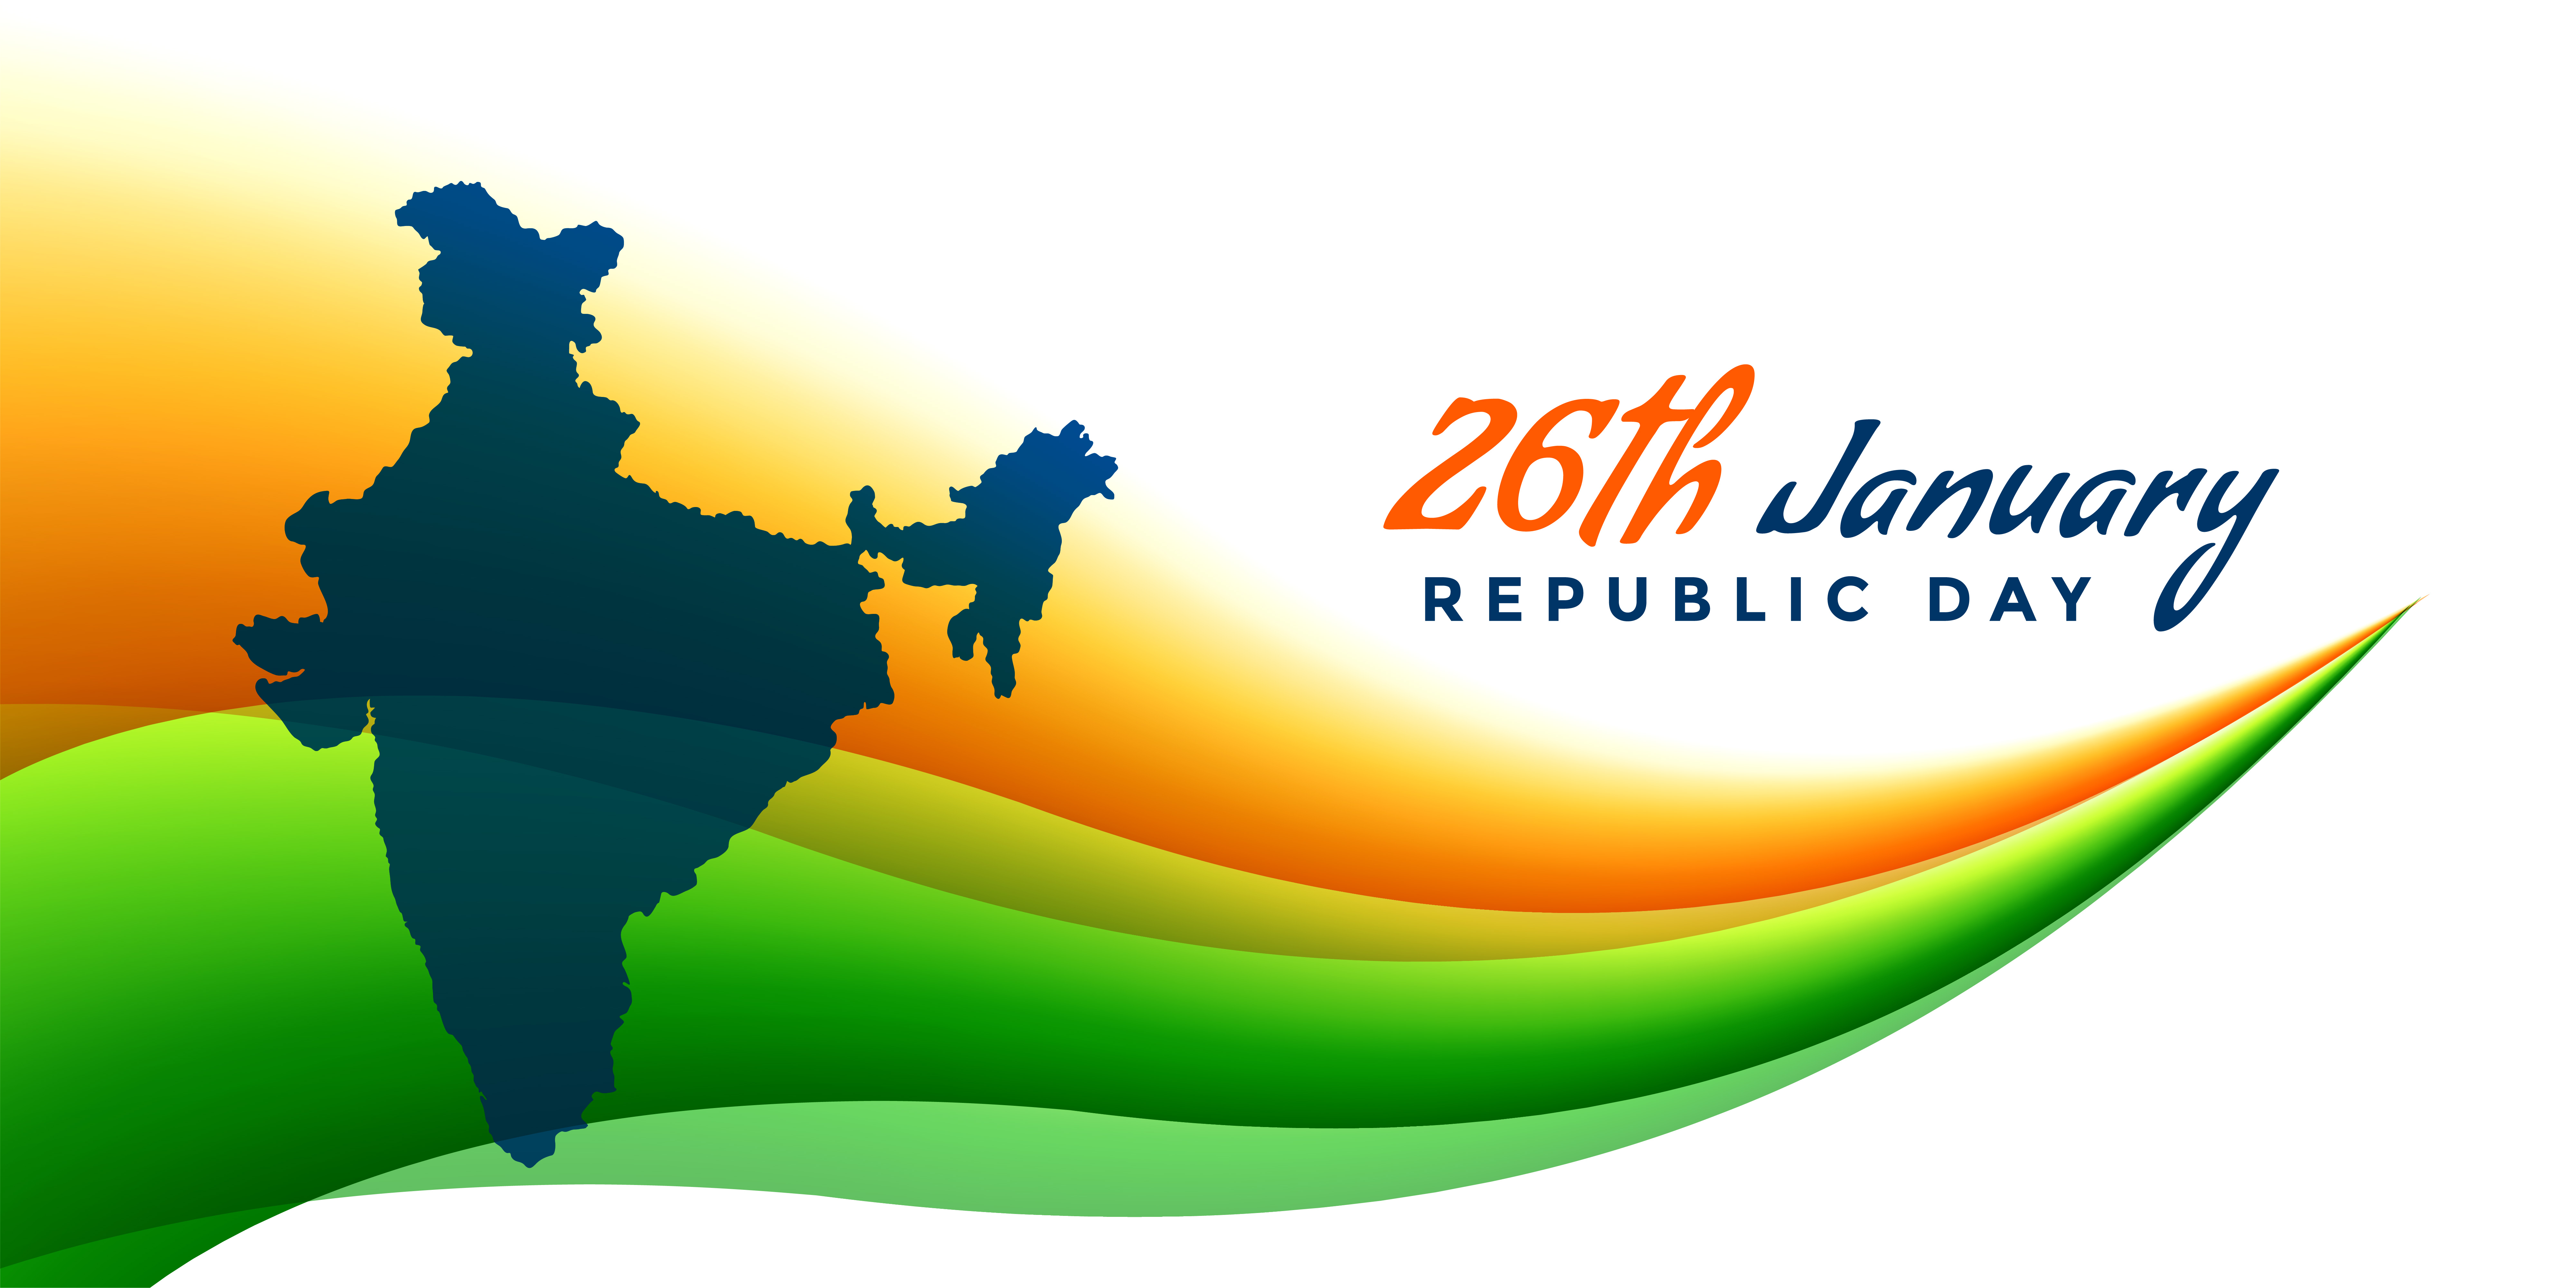 26th january republic day banner with map of india - Download Free